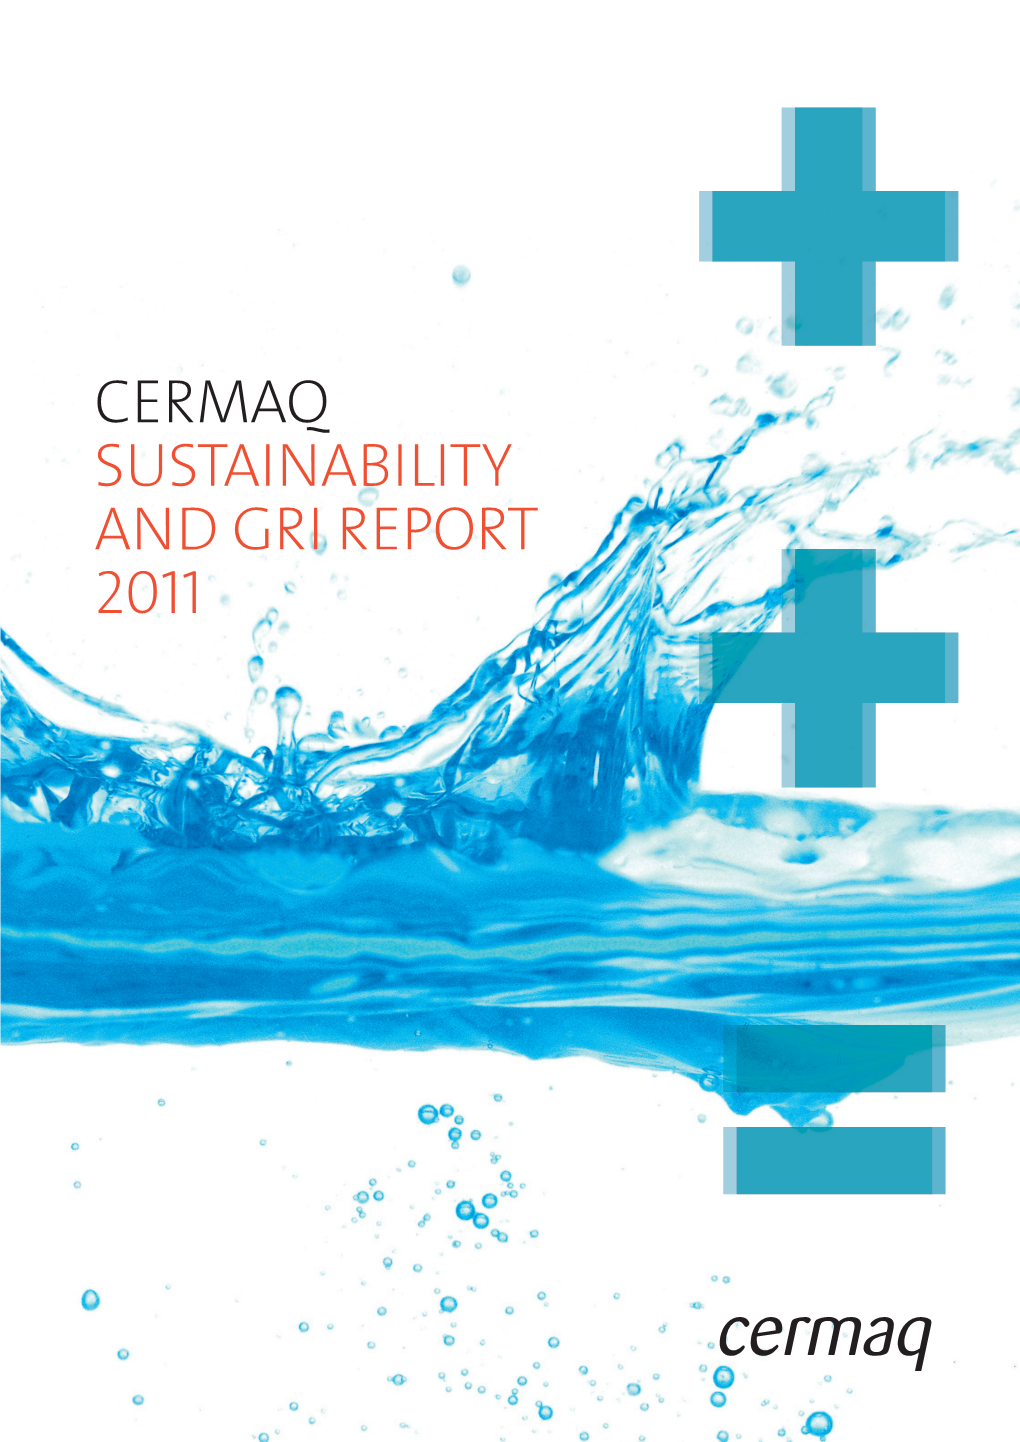 Cermaq Sustainability and Gri Report 2011